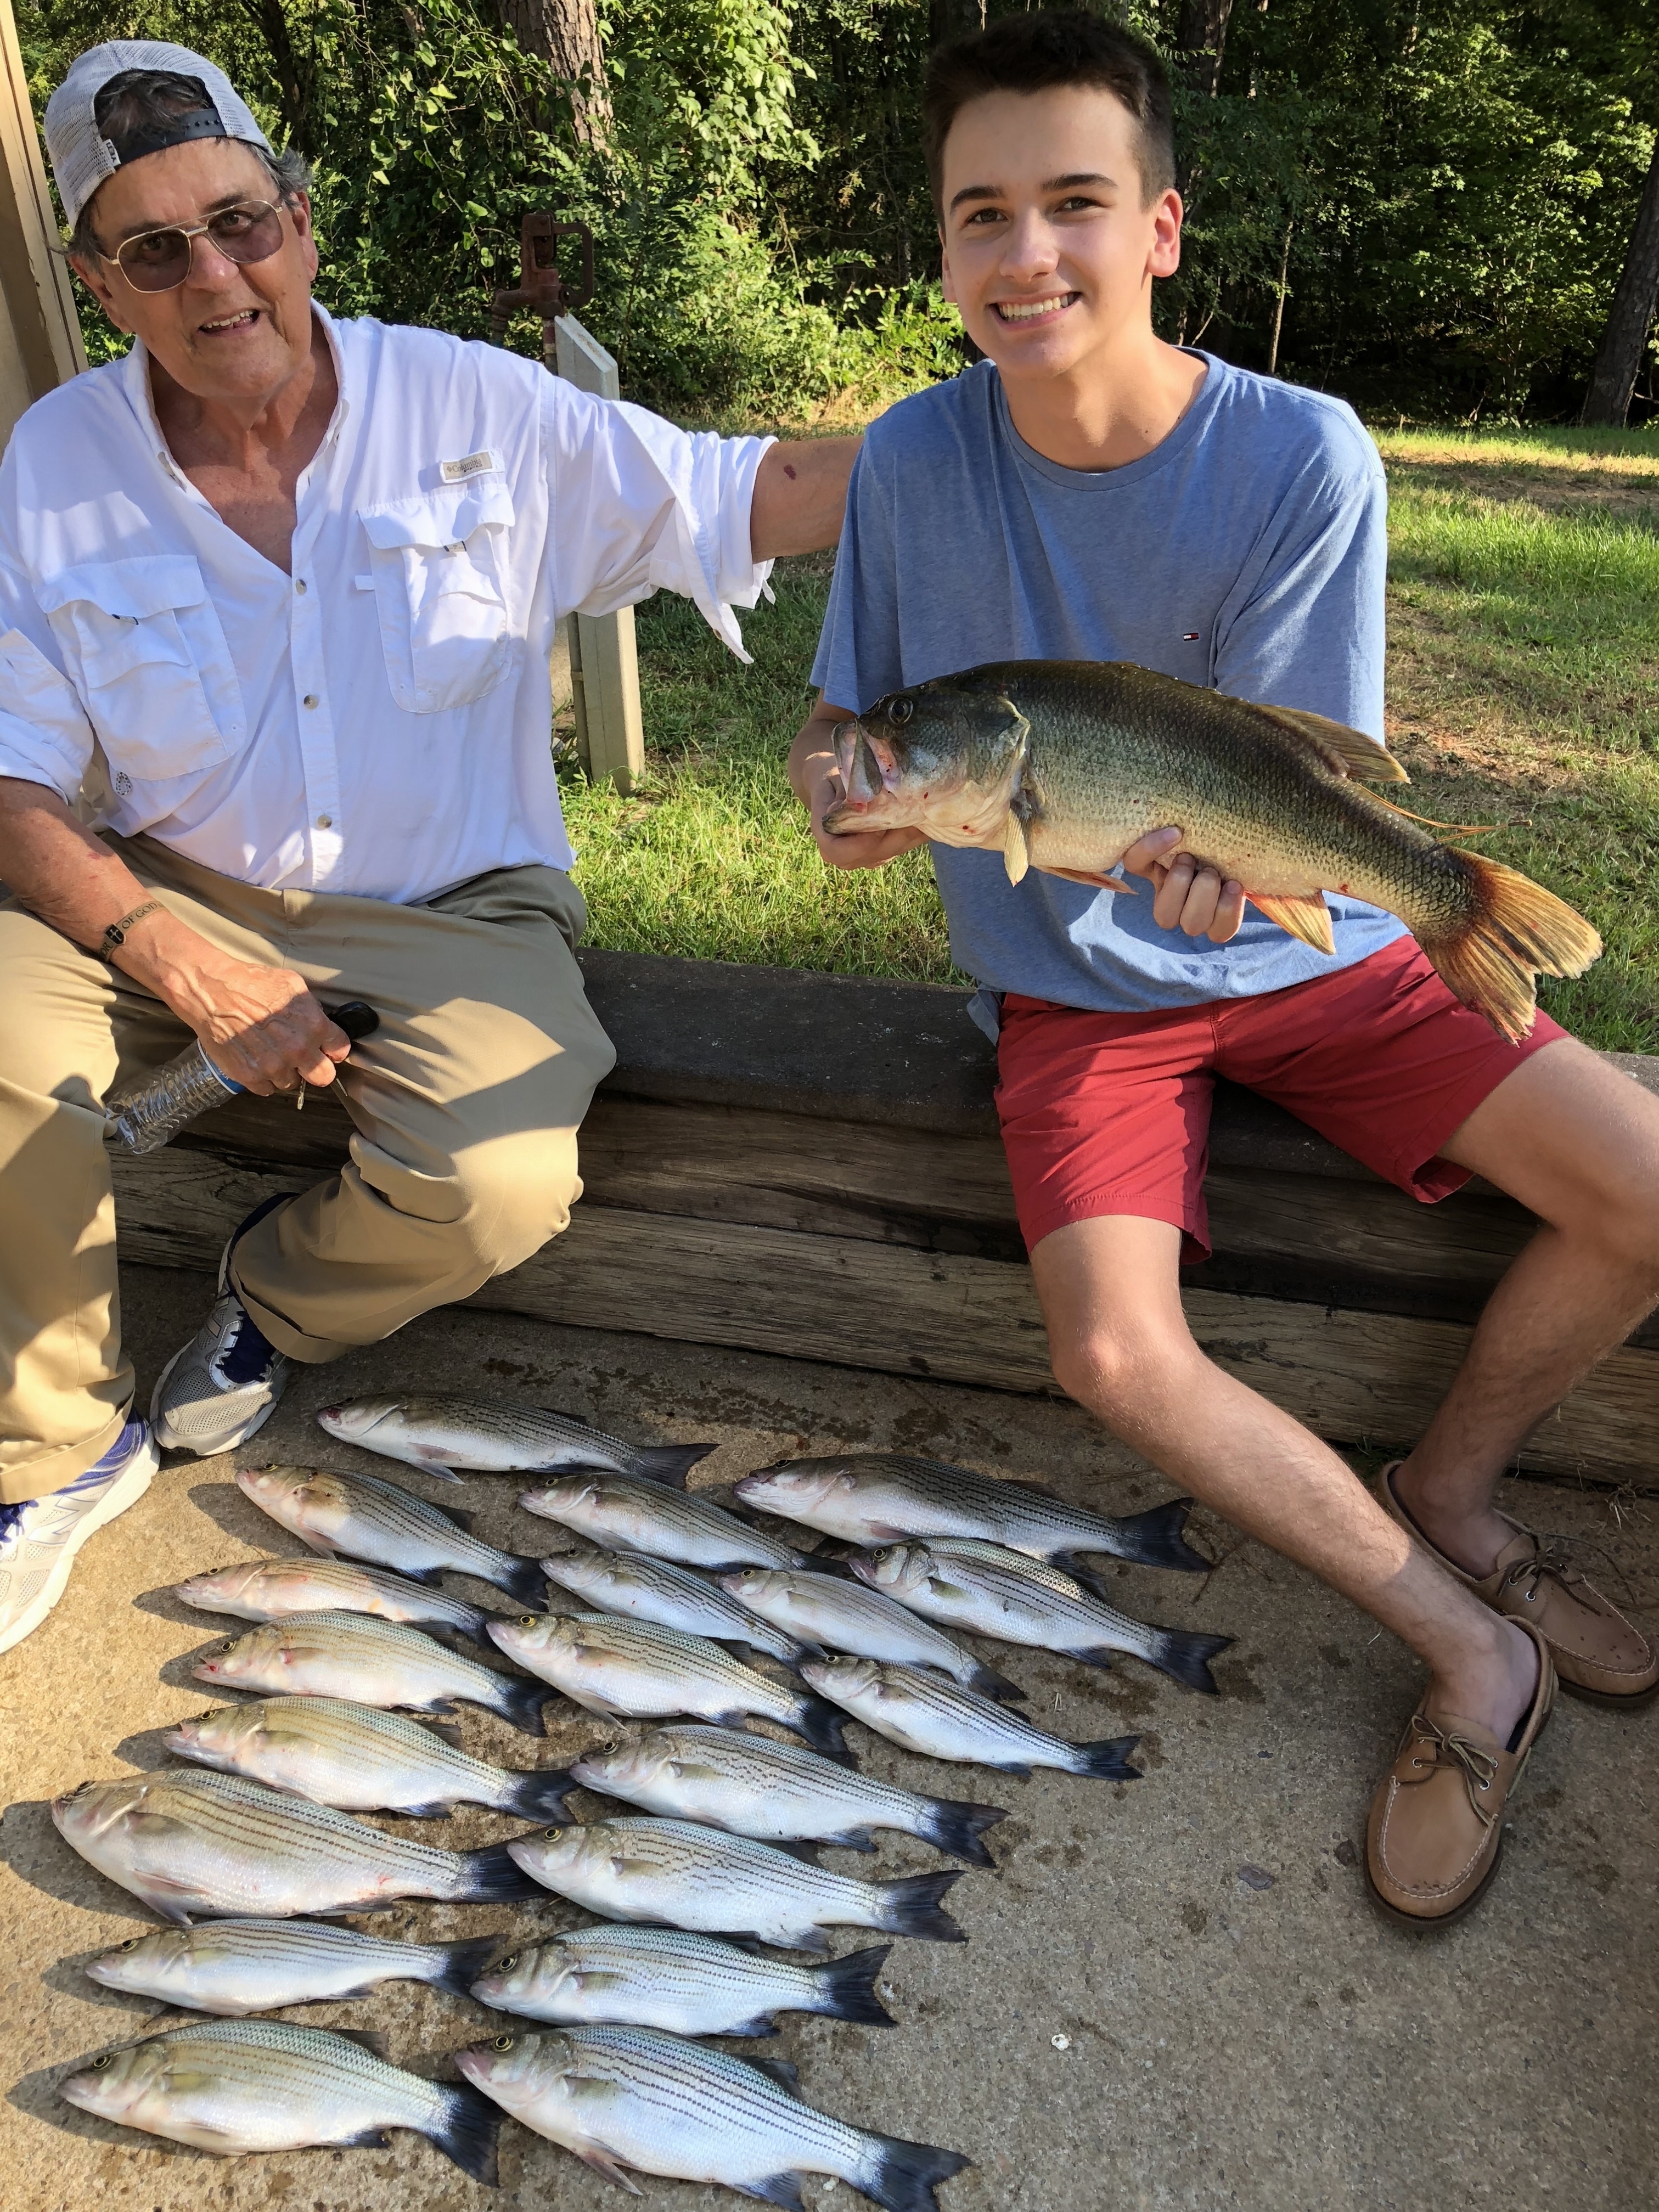 July 10, 2018Terry Williams from Eavns with his Grandson Chase Roberts from Winchester Va. and their catch of the day.IMG_2254